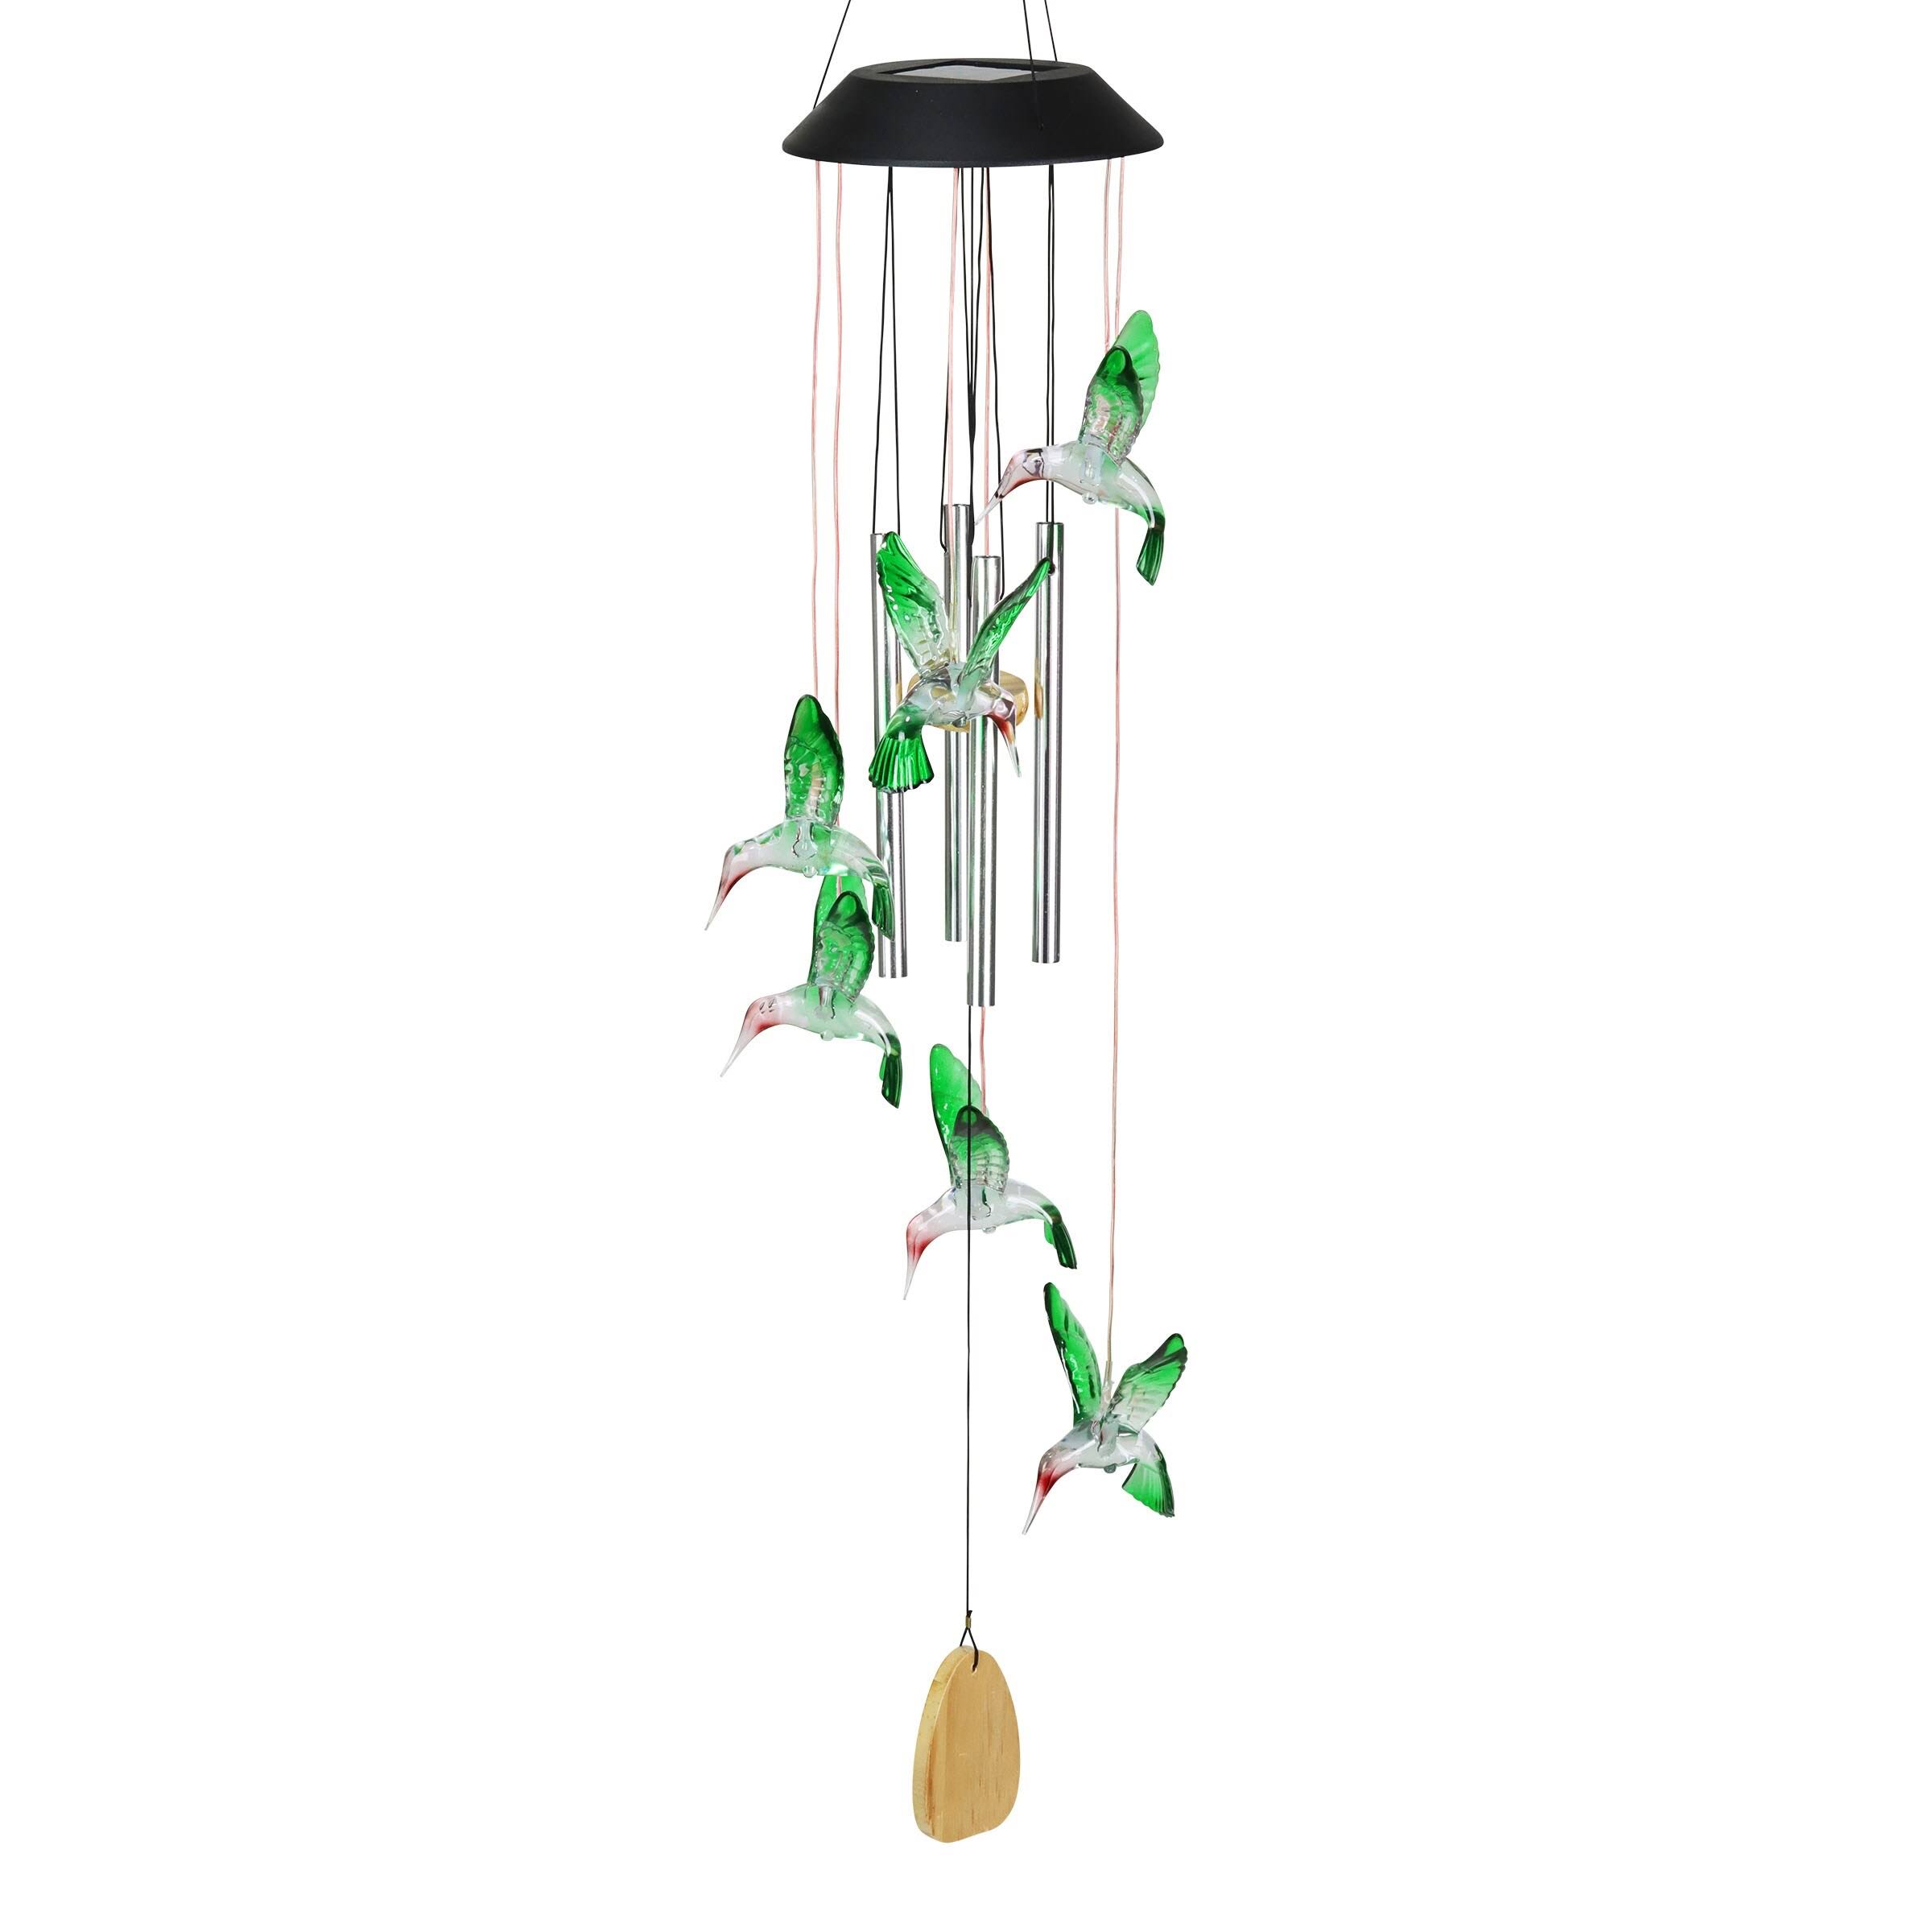 Exhart Solar Hummingbird Acrylic and Metal Wind Chime with Color Changing LED lights, 5 by 26 Inches - Clear - Plastic